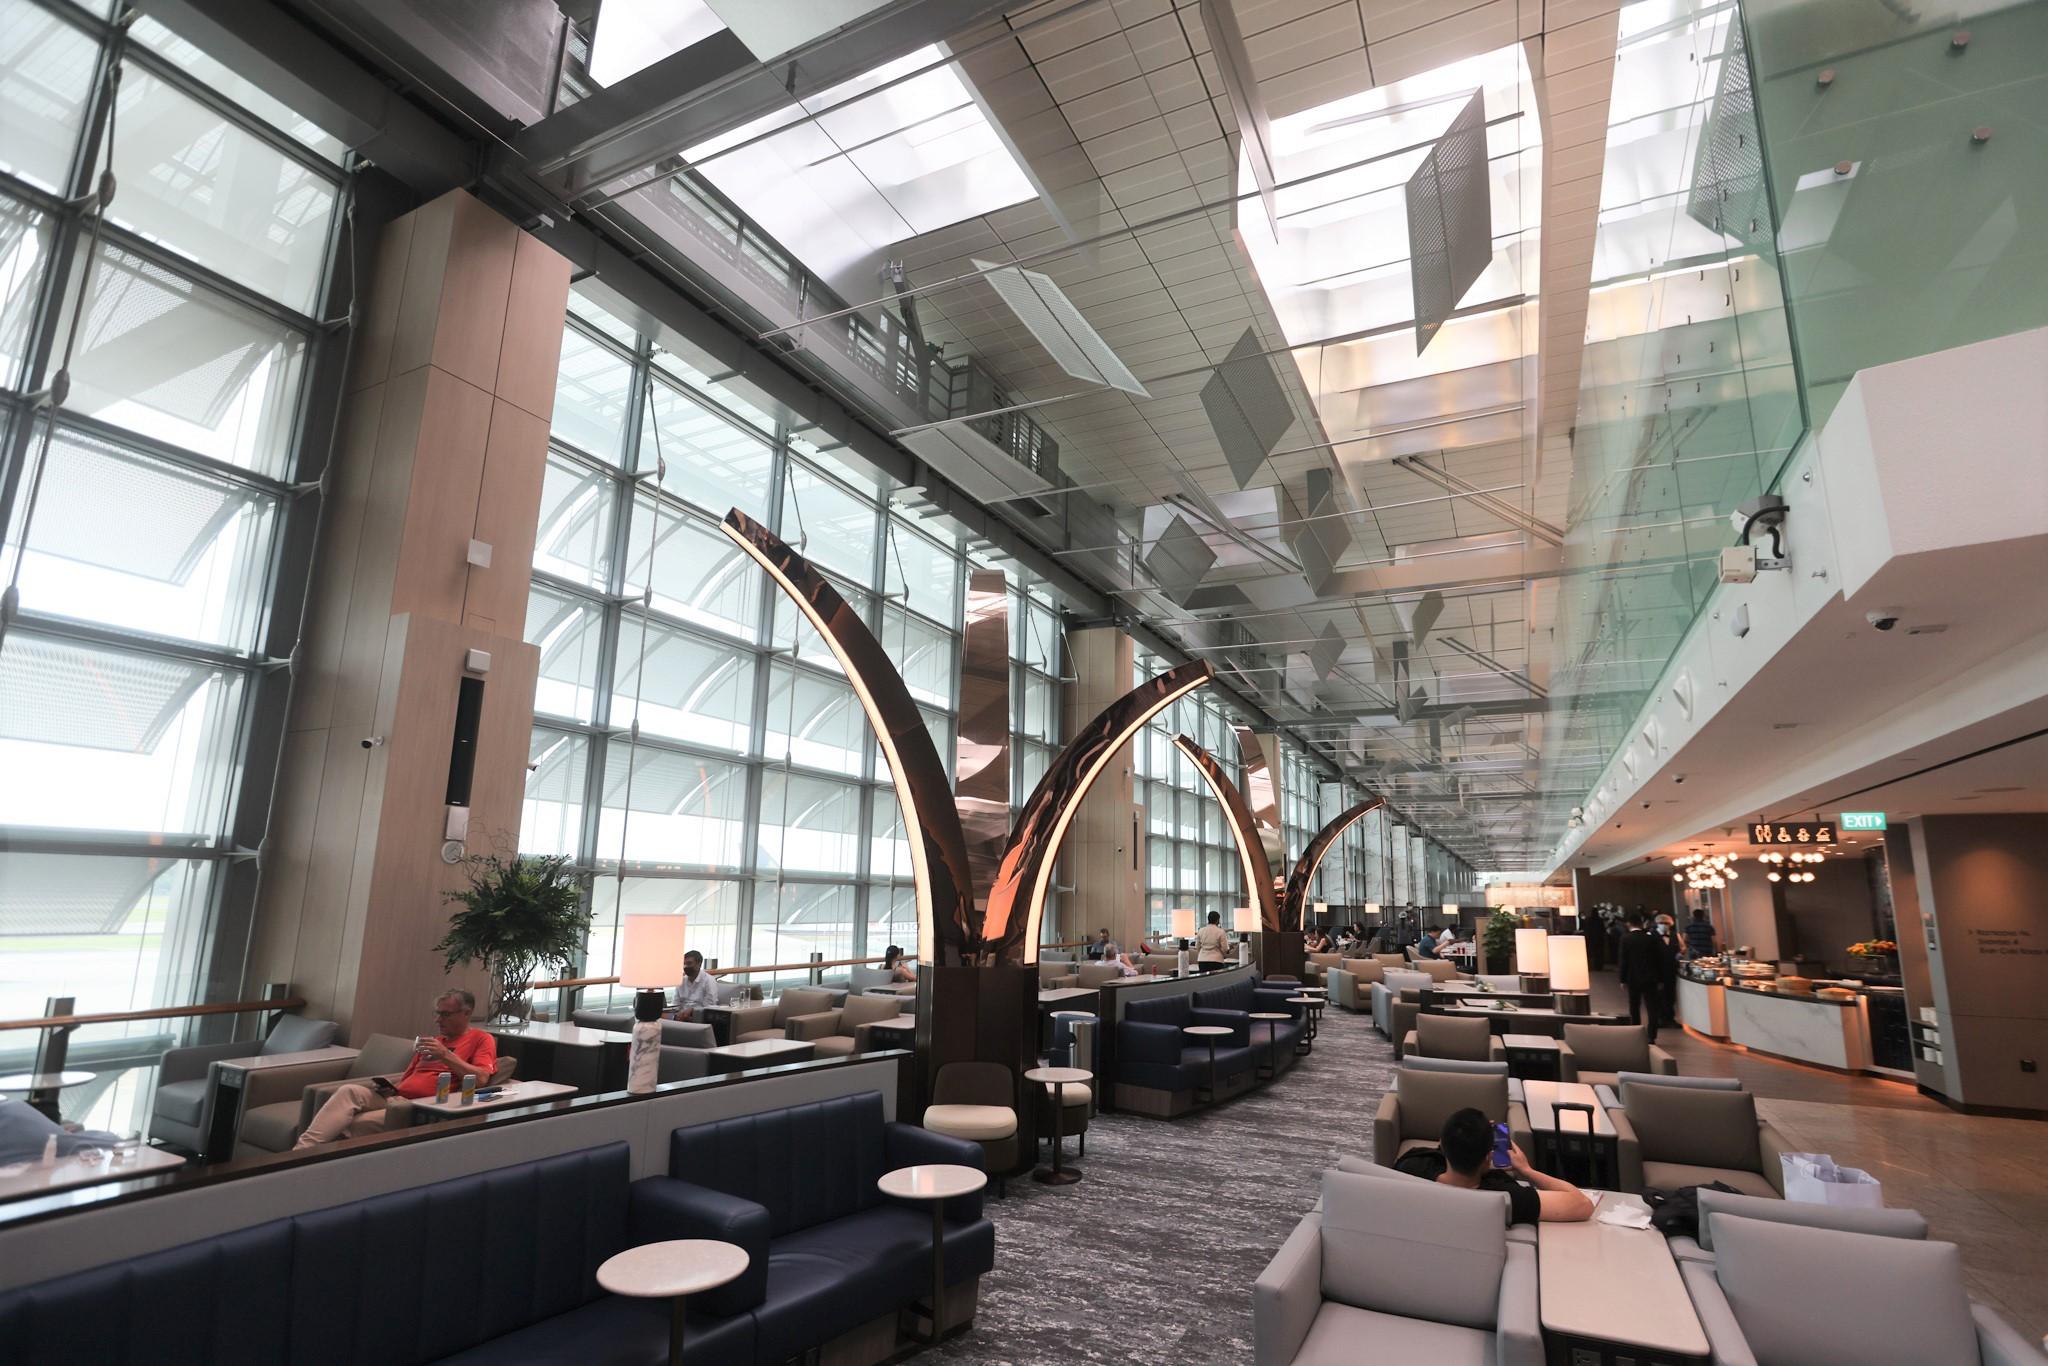 Airport lounges and gate projects, News